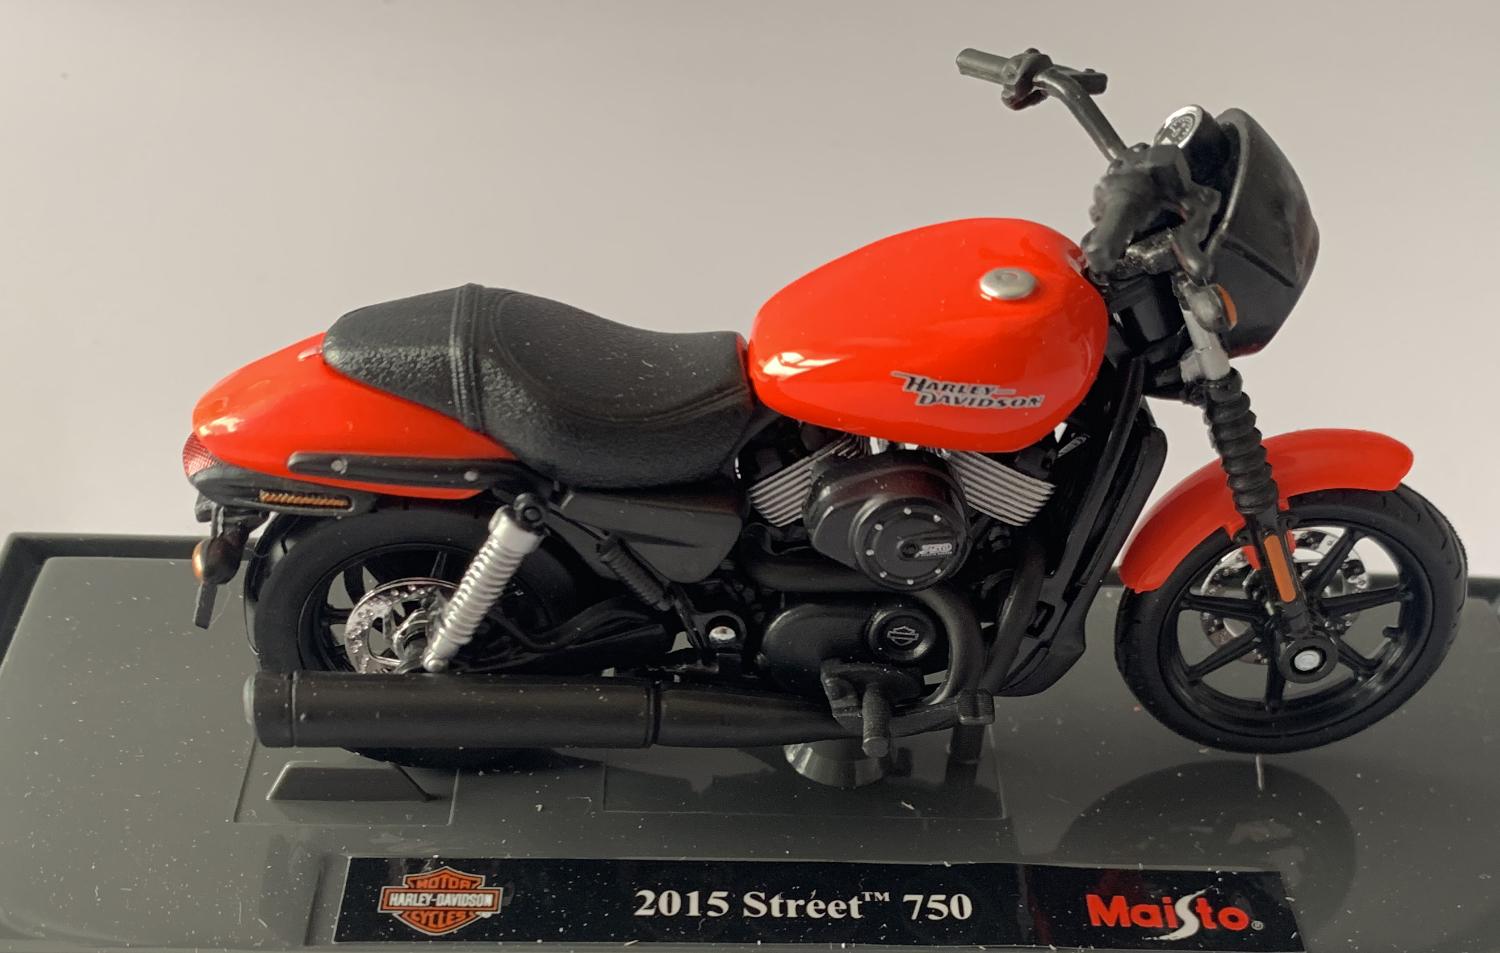 Harley Davidson 2015 Street 750 in bright red / black 1:18 scale model motorcycle   from Maisto